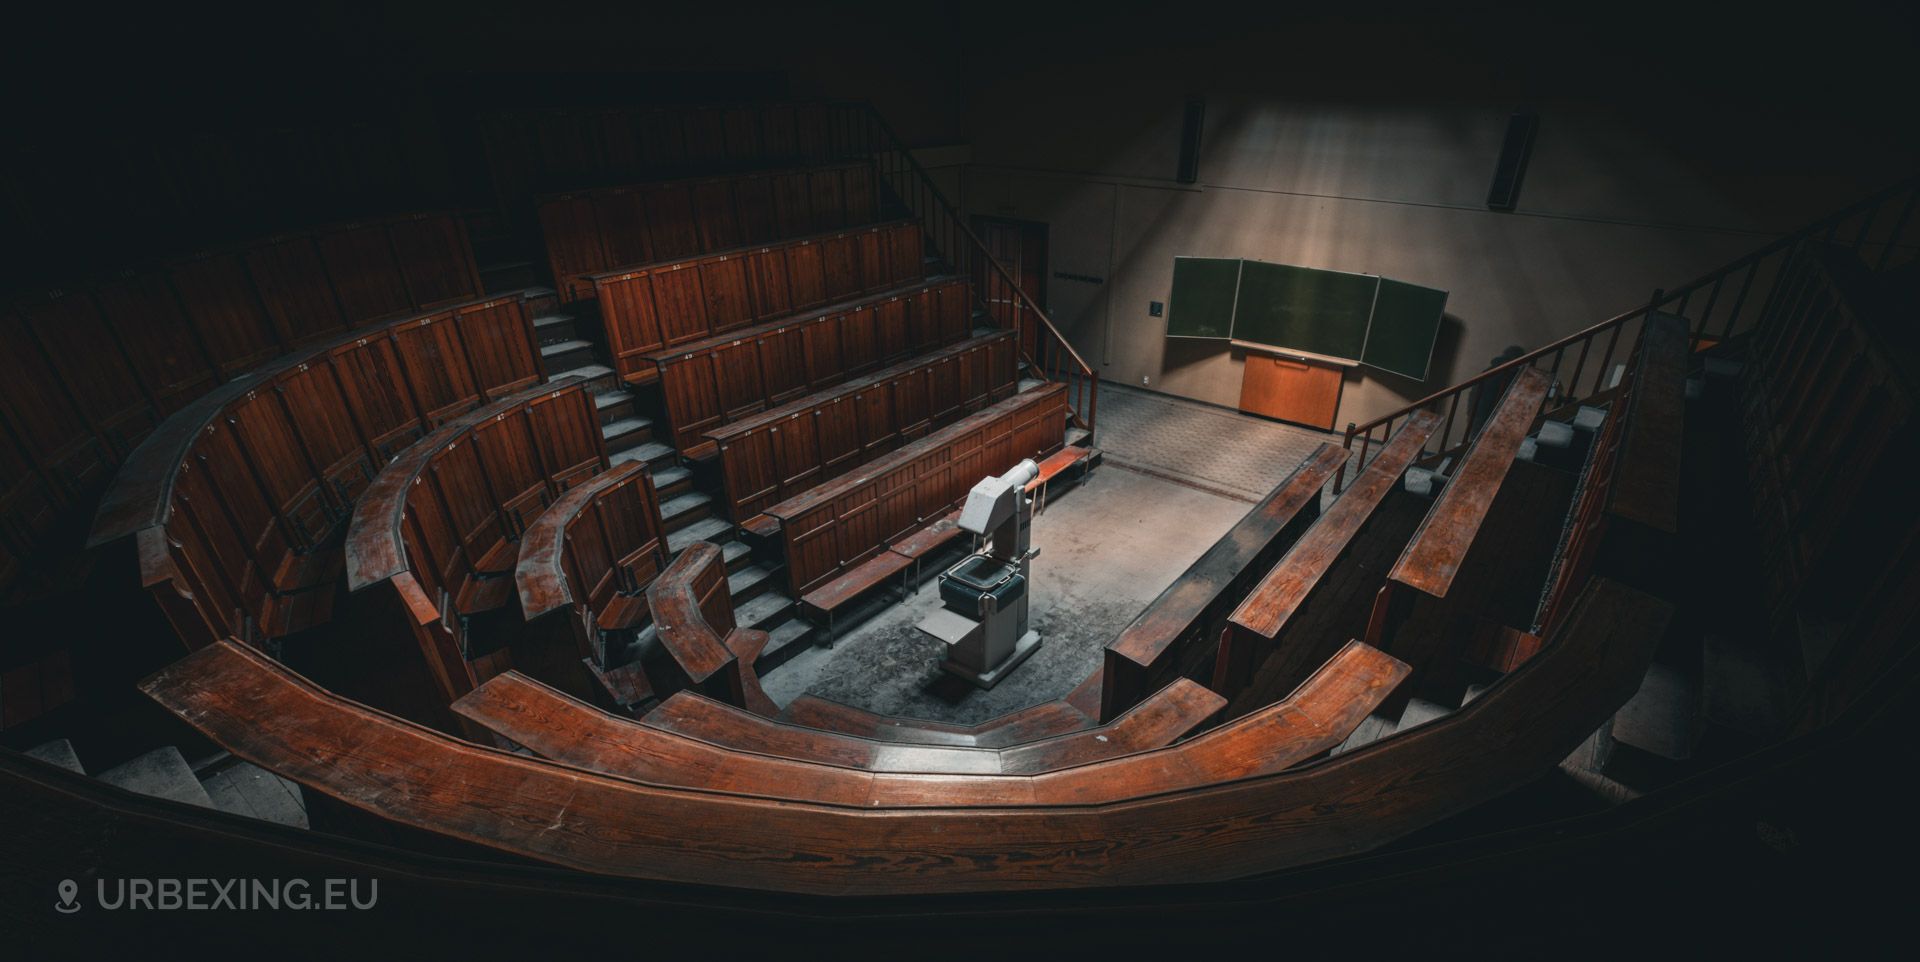 a photograph taken in an abandoned medical university. the photograph shows the overview of an auditorium, rows of wooden benches, a chalk board and an old projector